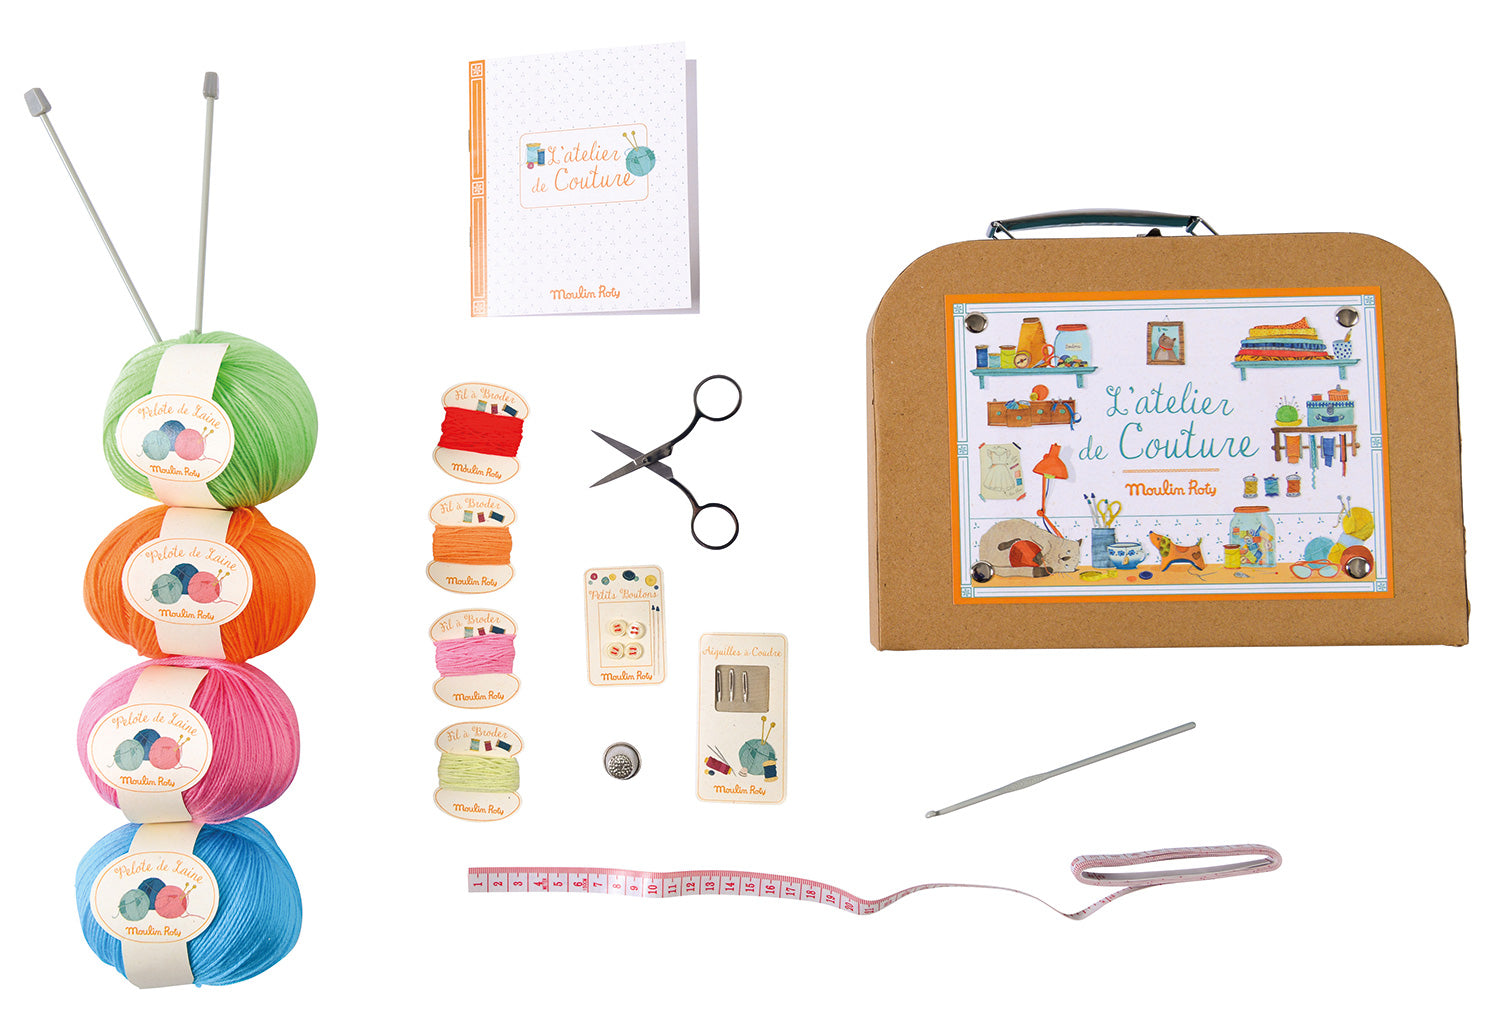 Moulin Roty | Sewing & Knitting Kit in Illustrated Carry Case | Age: 6+